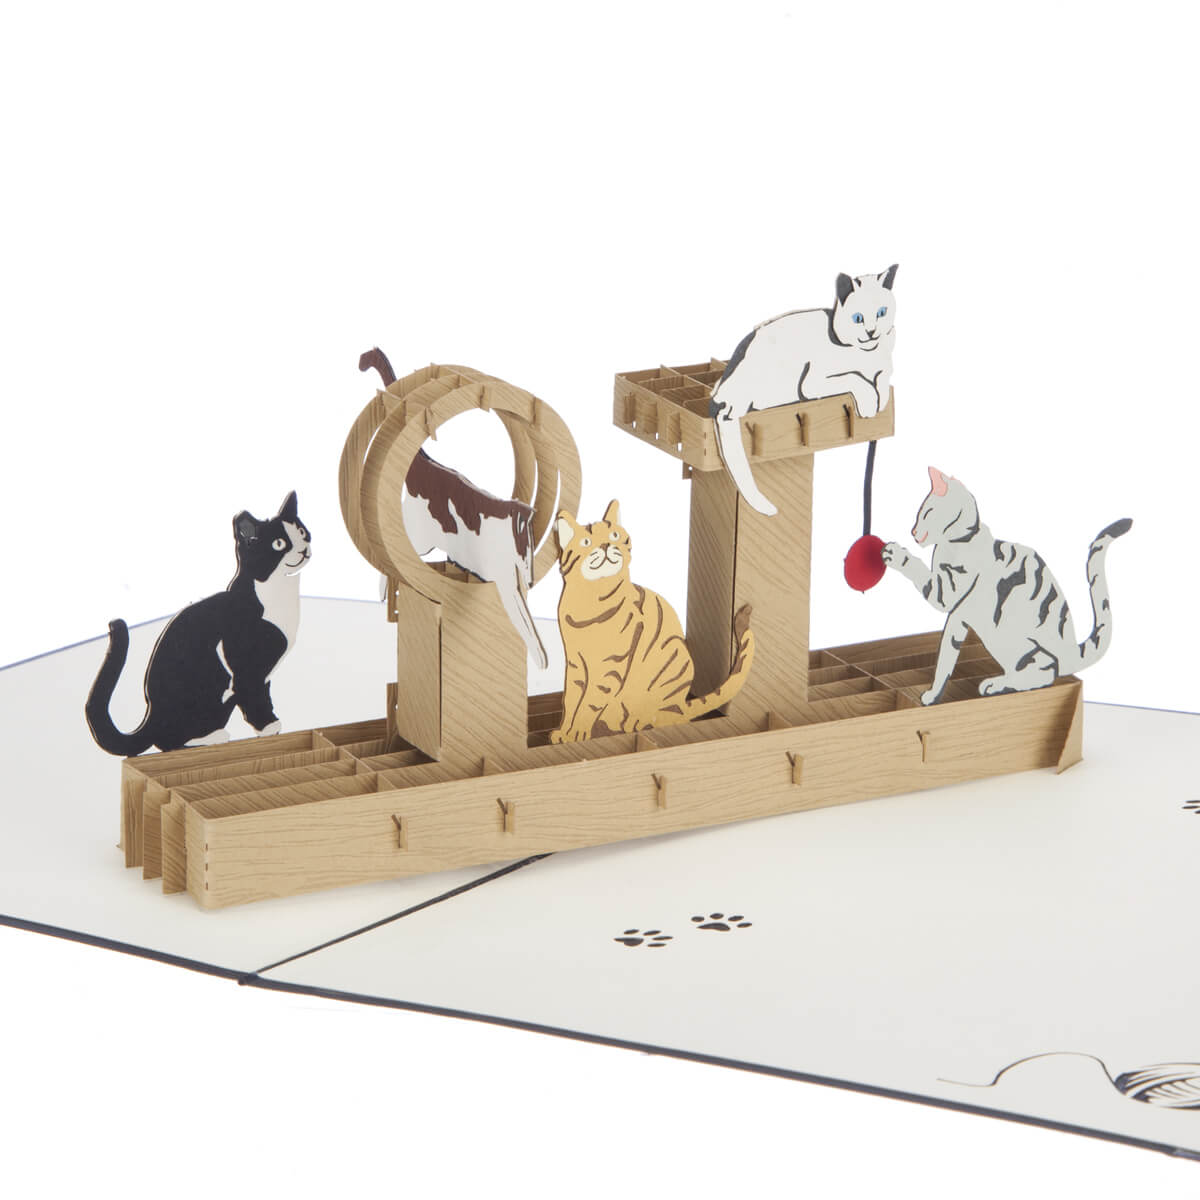 Close up image of "Cat Tree" Pop Up Card featuring 5 cats playing on a pop up cat tree